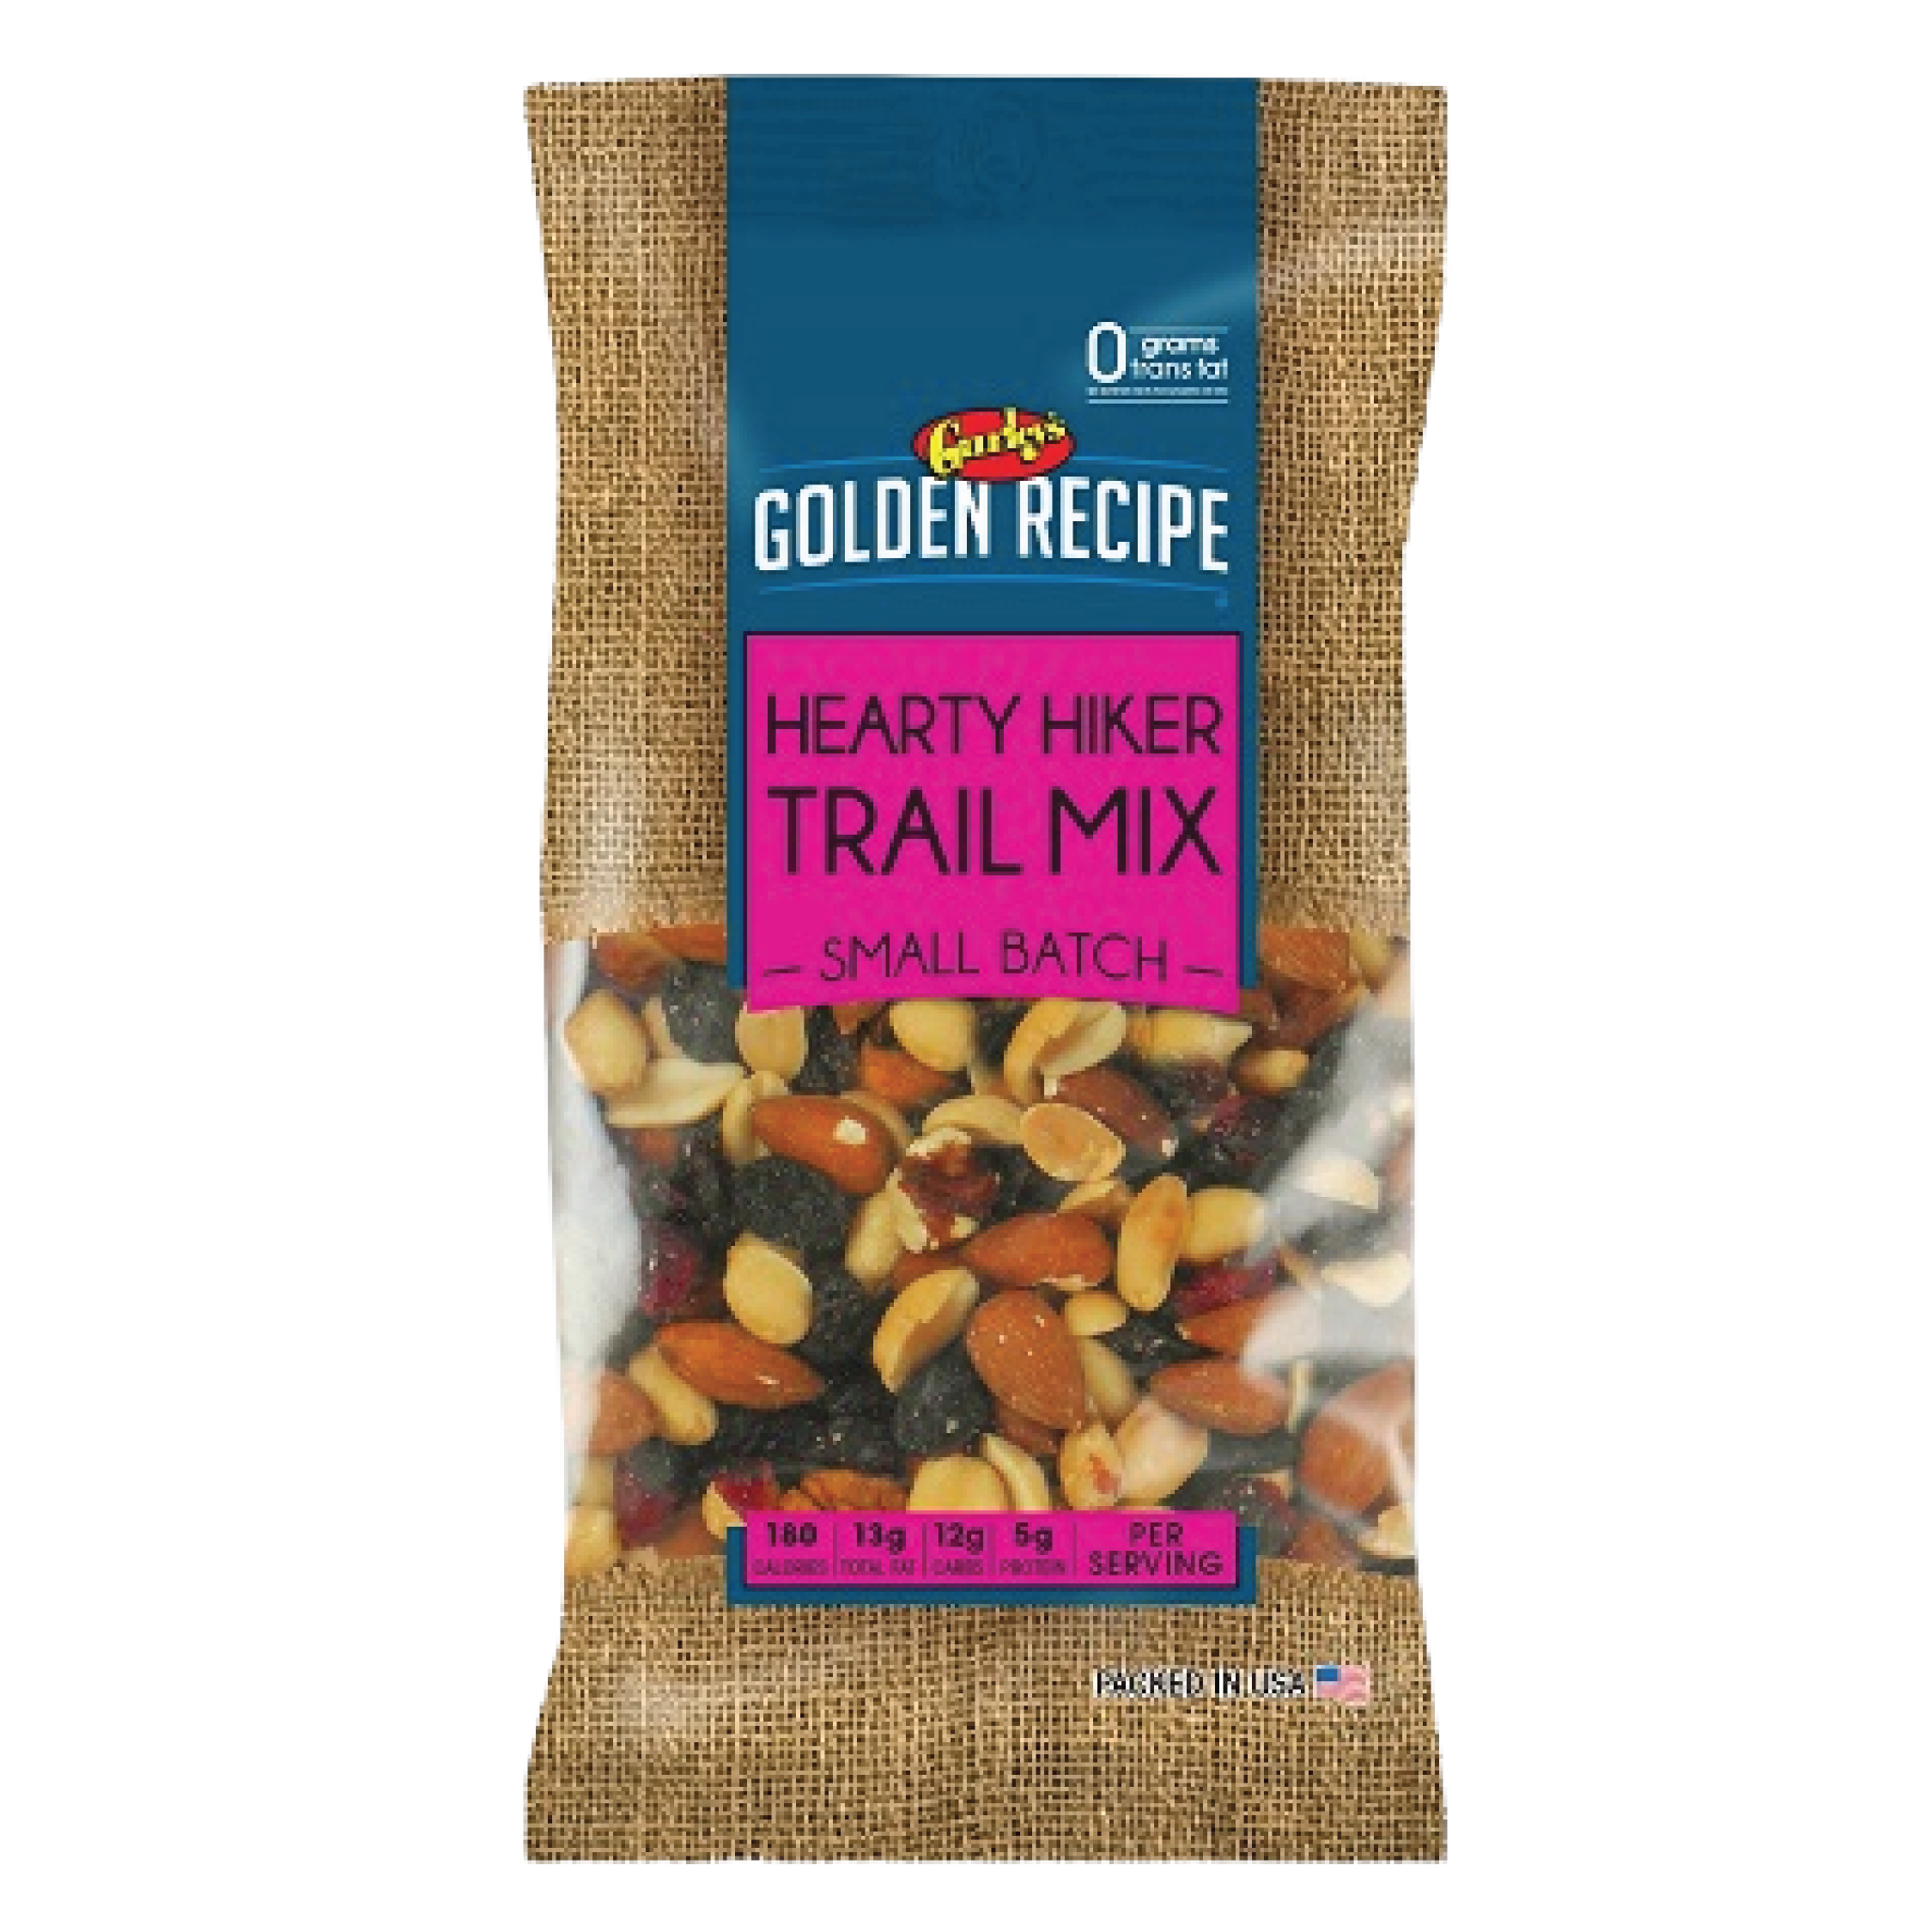 Gurley's Small Batch Golden Recipe Hearty Hiker Trail Mix 5oz